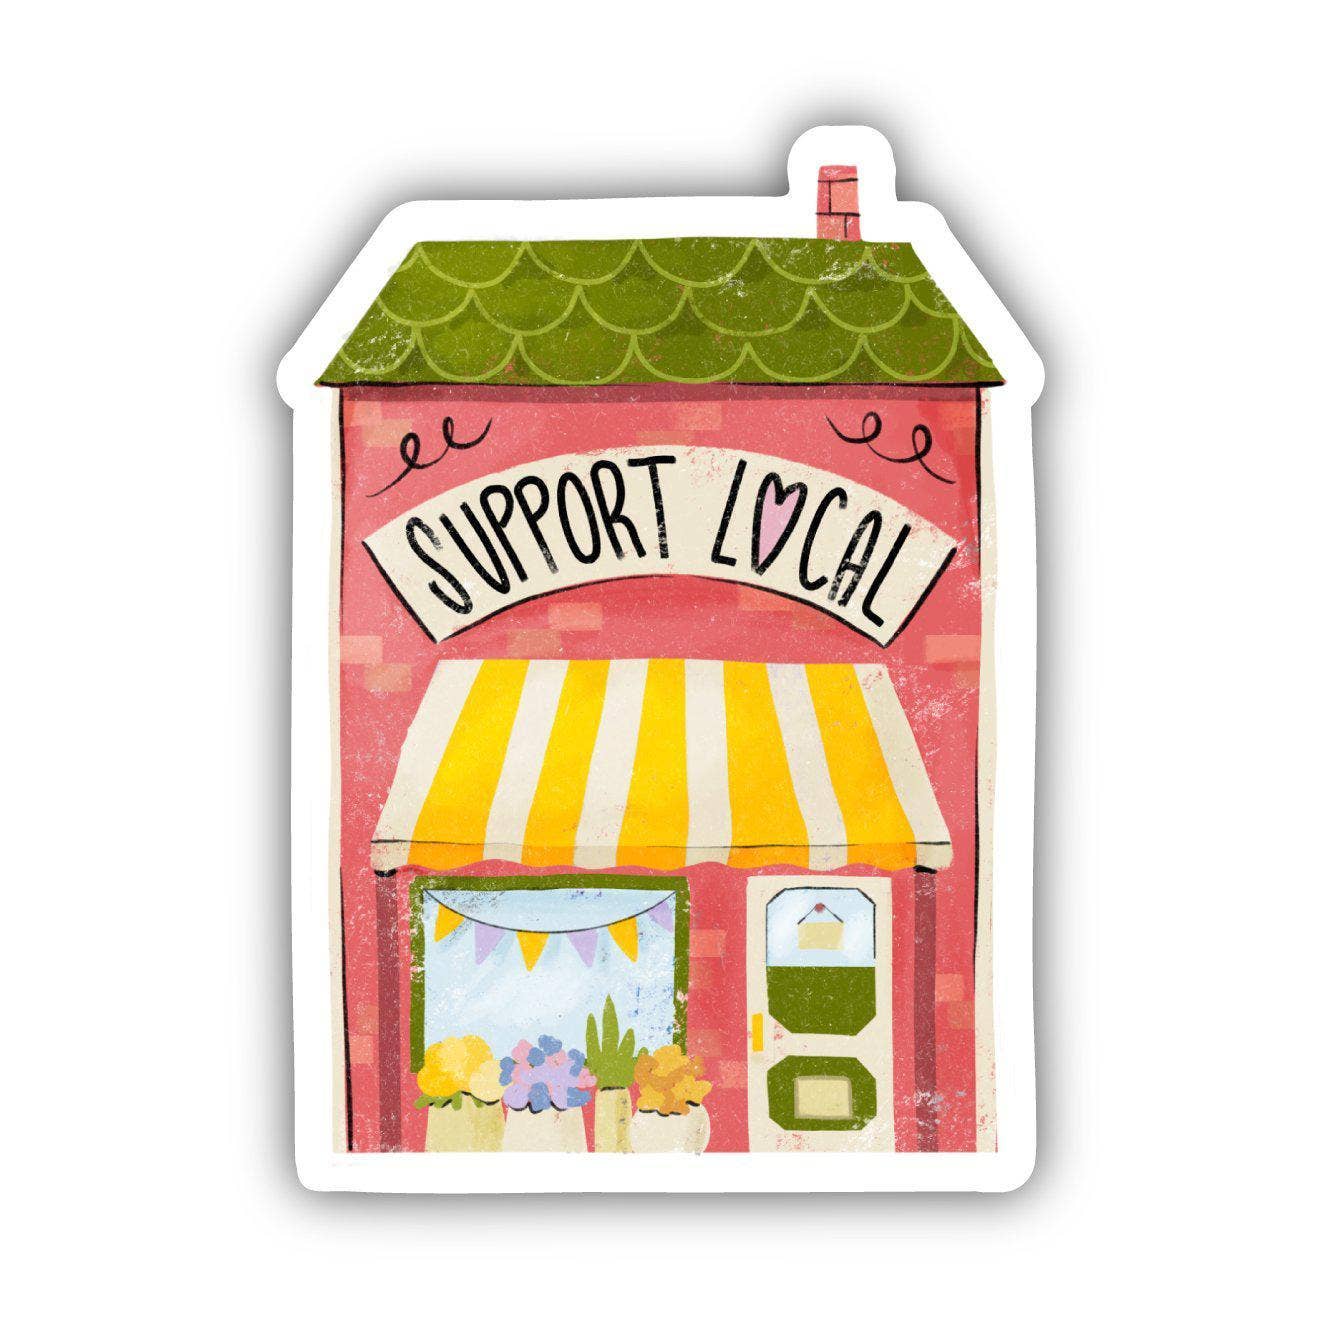 Support Local - Holiday Sticker